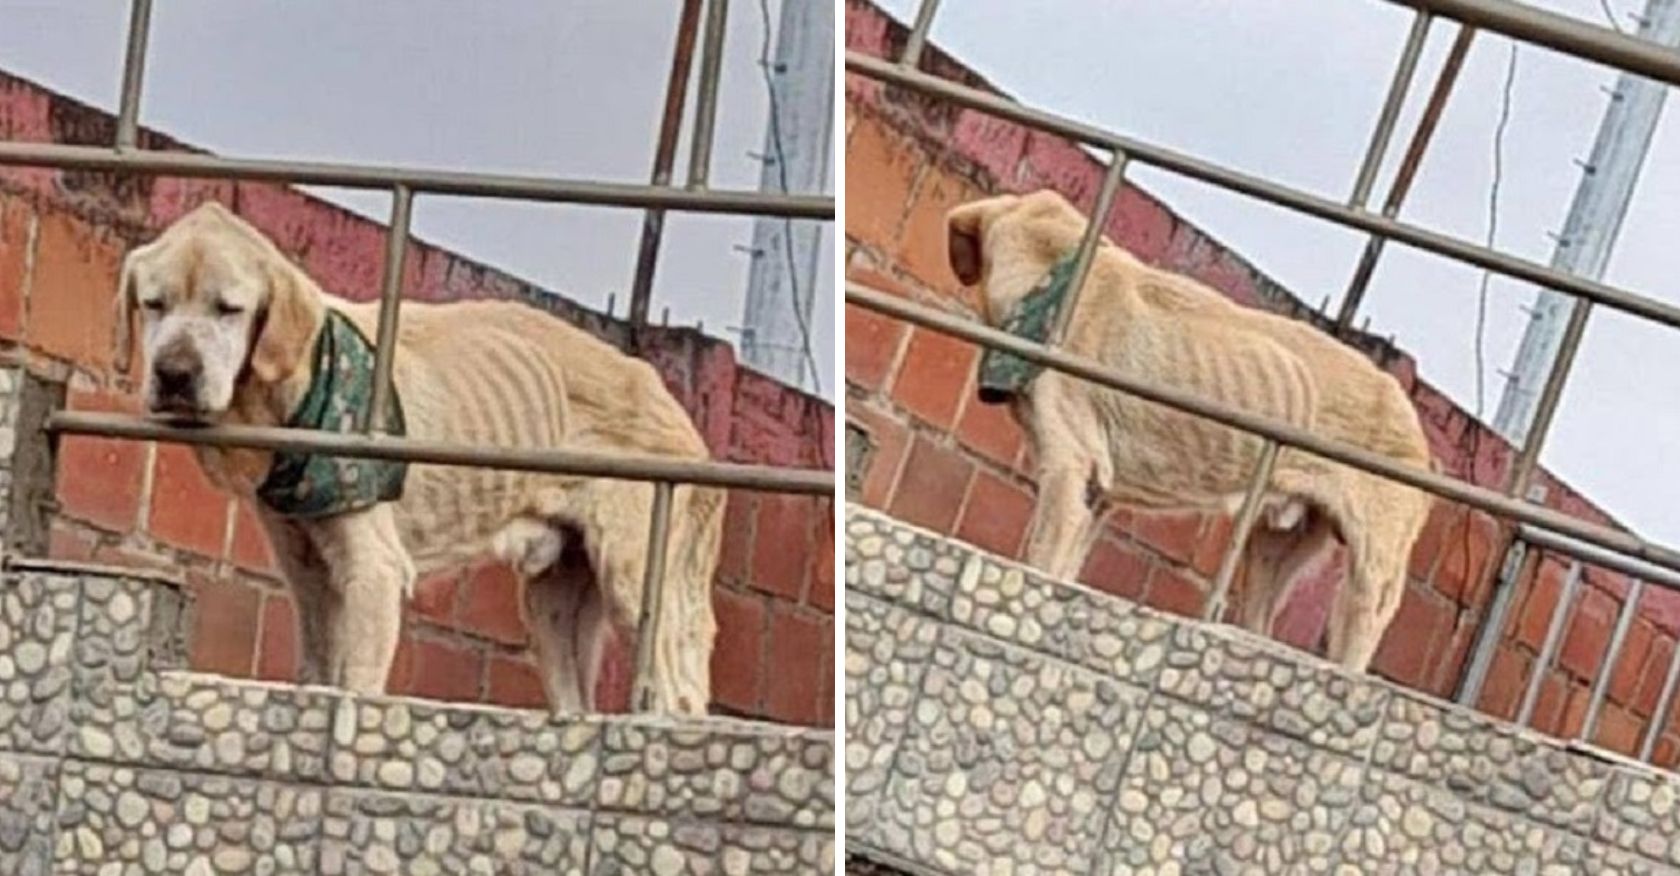 “Emaciated and Heartrending, Dog Survives Days Alone on a Roof, Desperately Awaiting Rescue.”